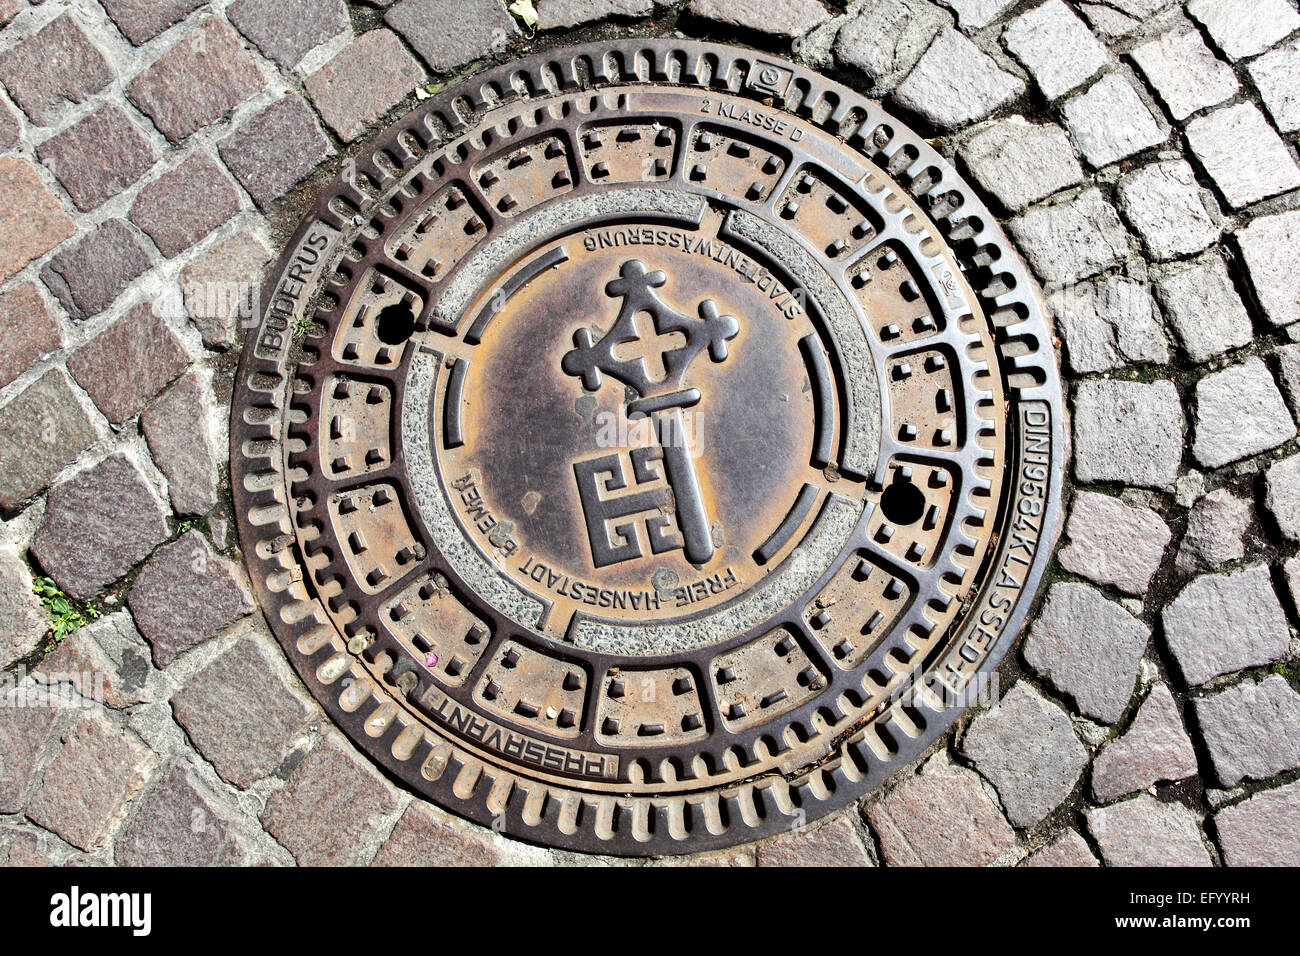 Man hole cover in Bremen, Germany Stock Photo